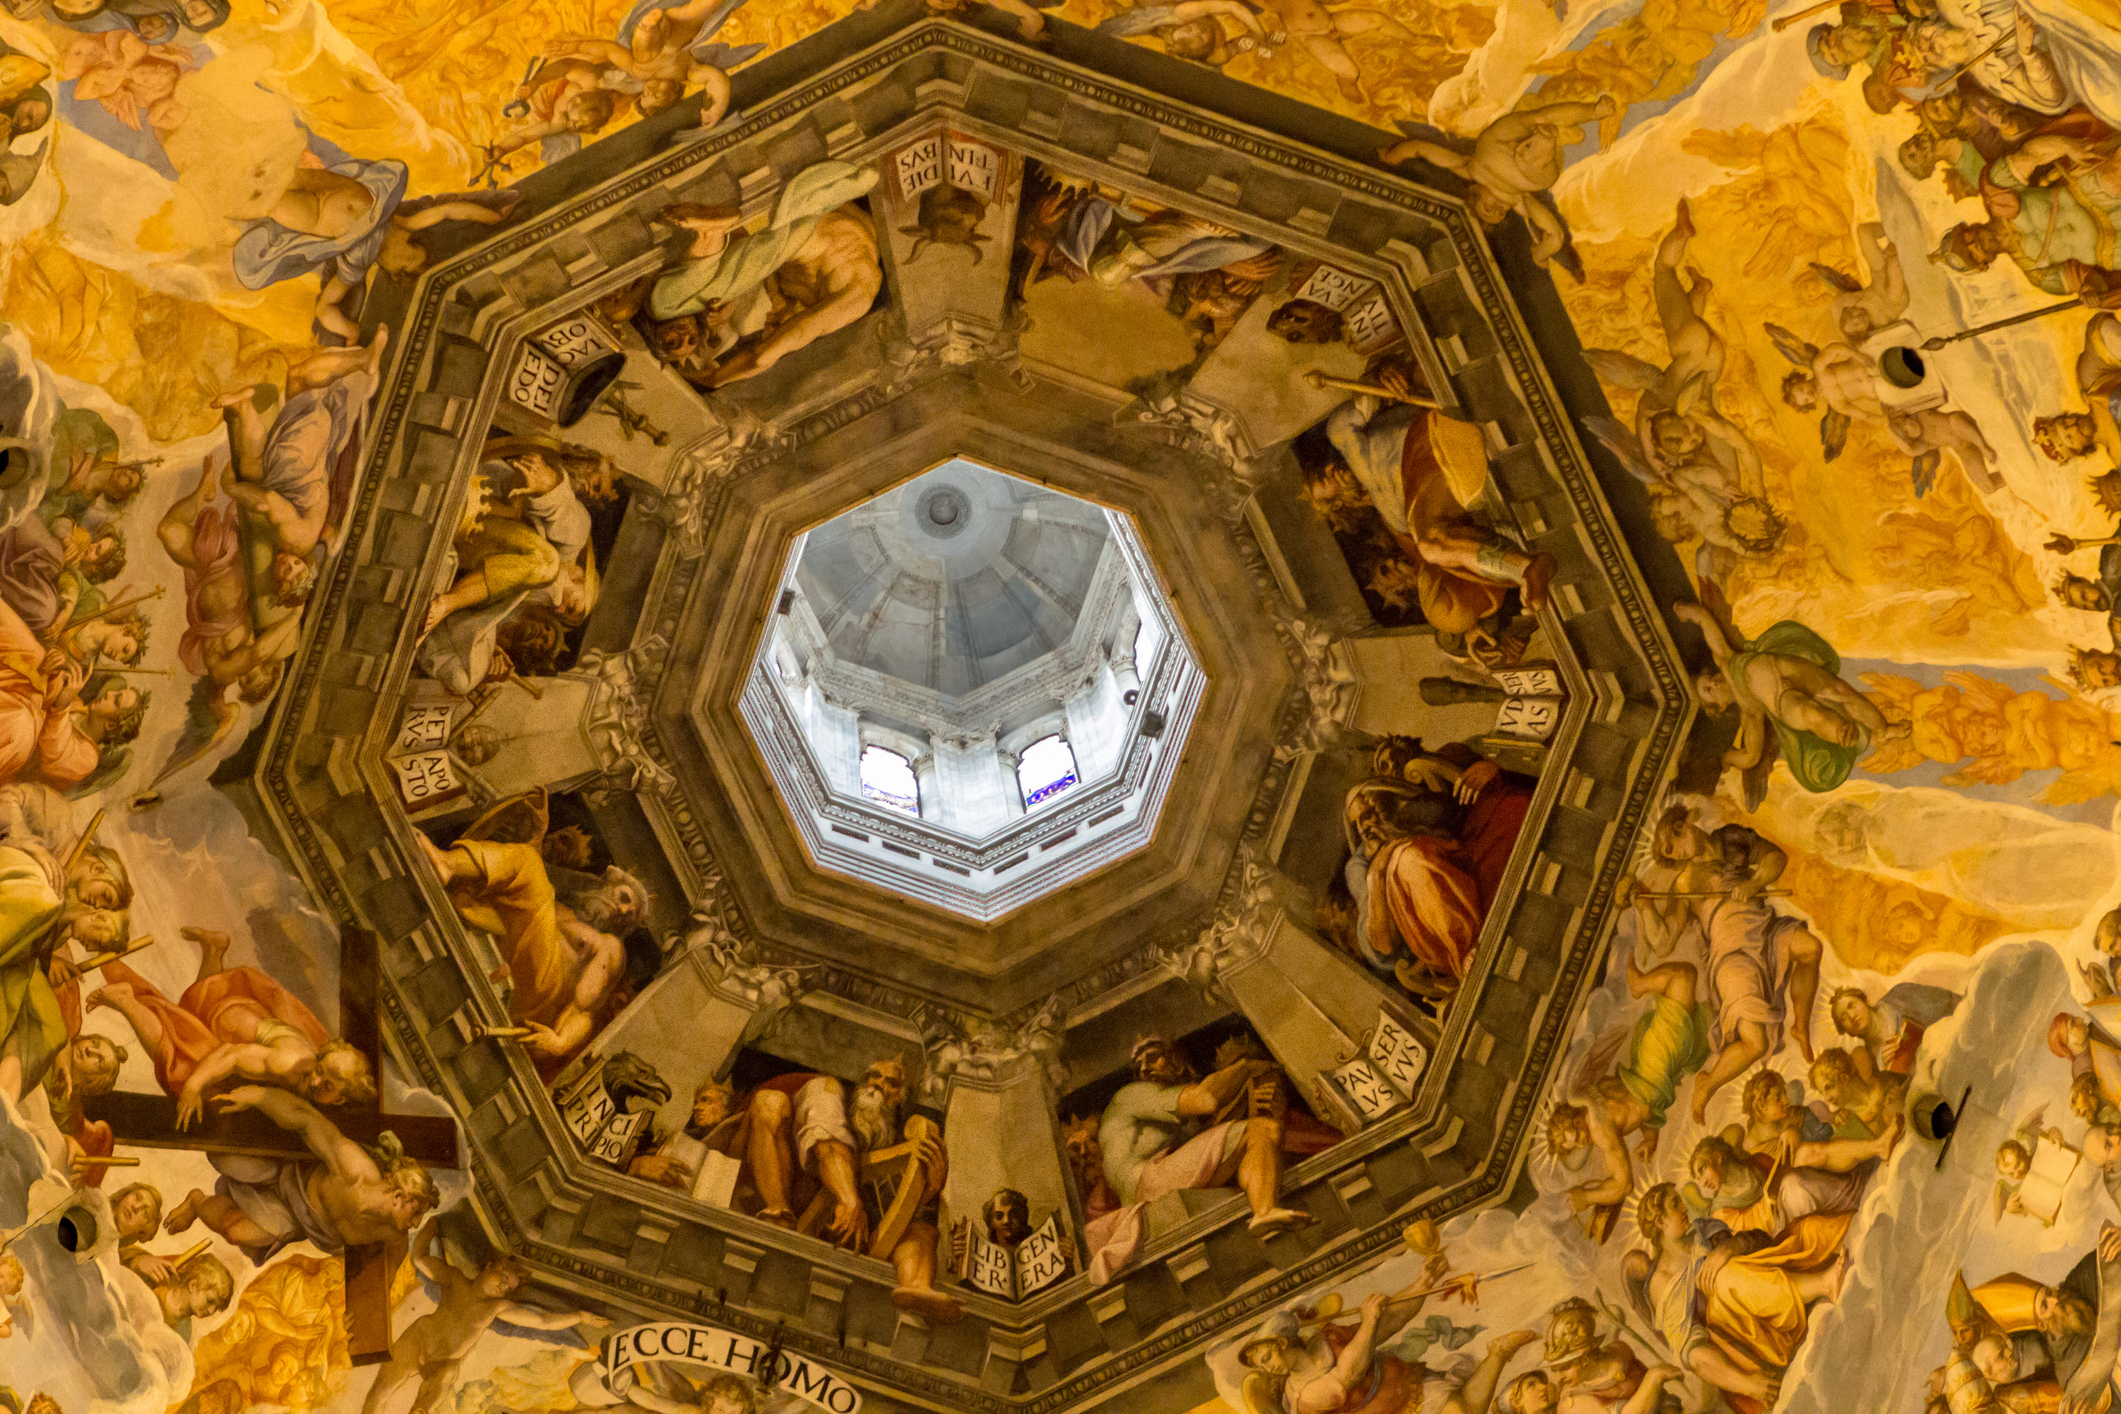 Judgment Day on ceiling of Santa Maria del Fiore, Florence